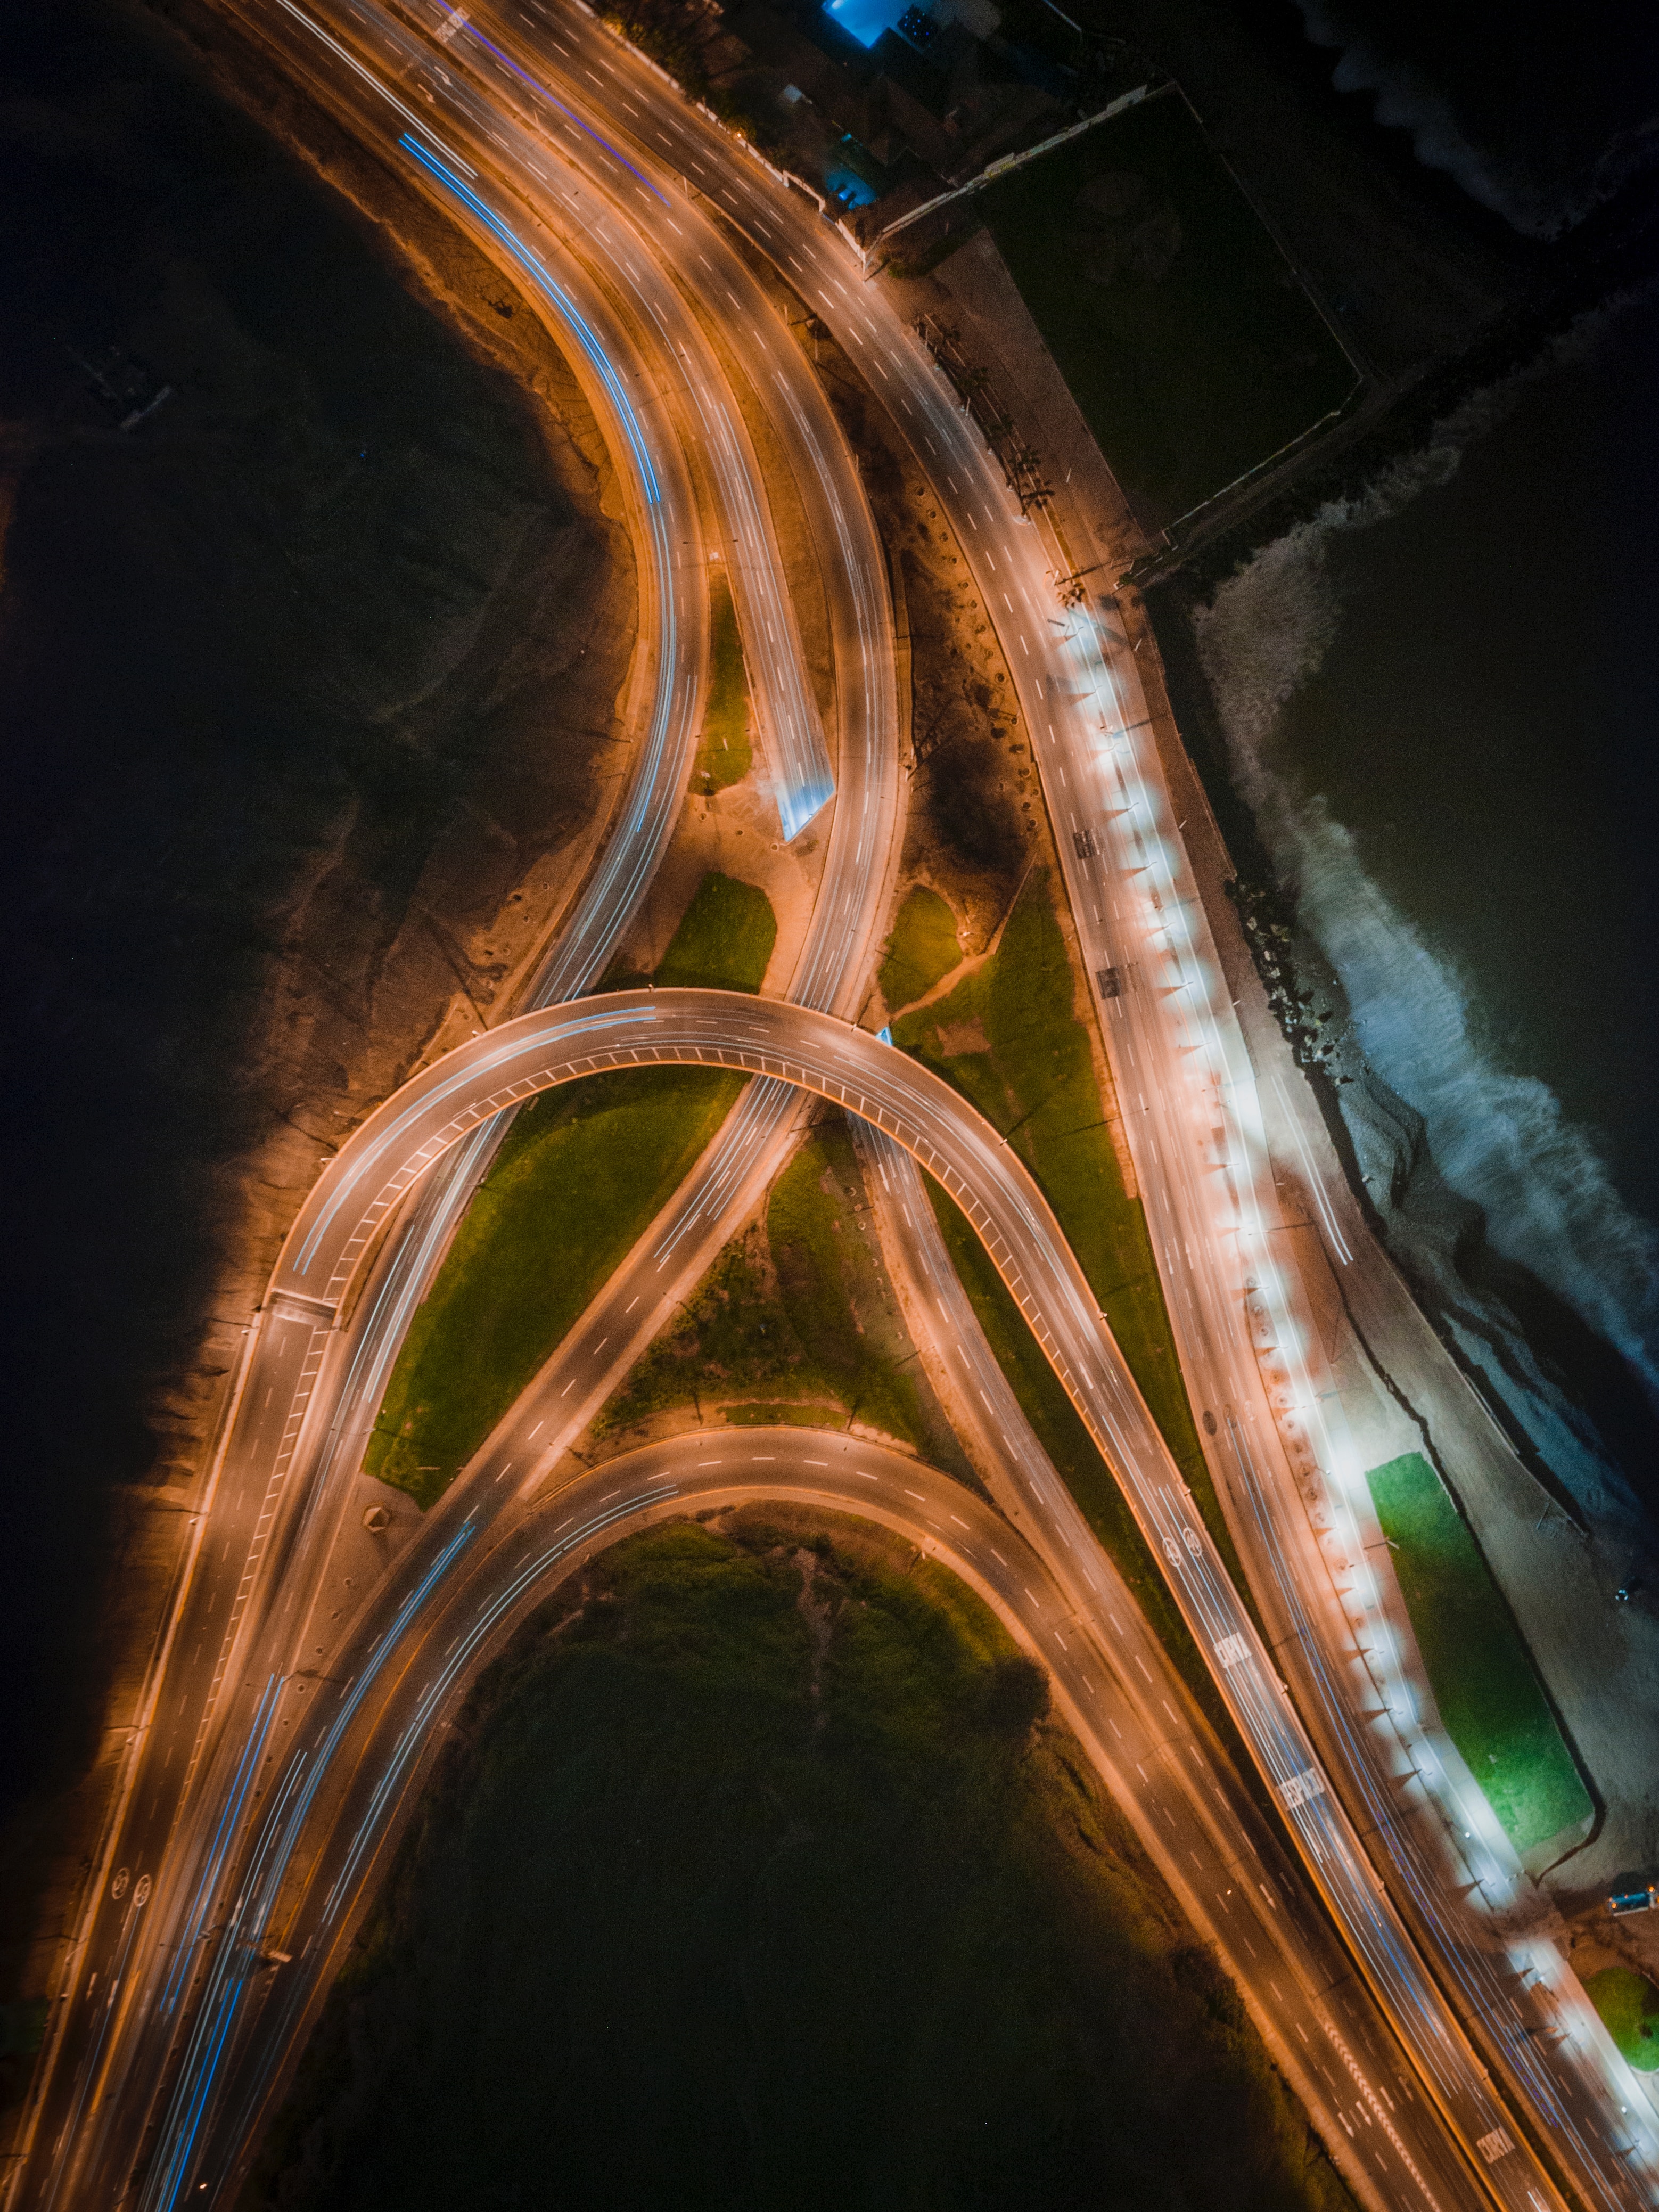 intricate, backlight, view from above, dark, road, illumination, confused, road junction cellphone